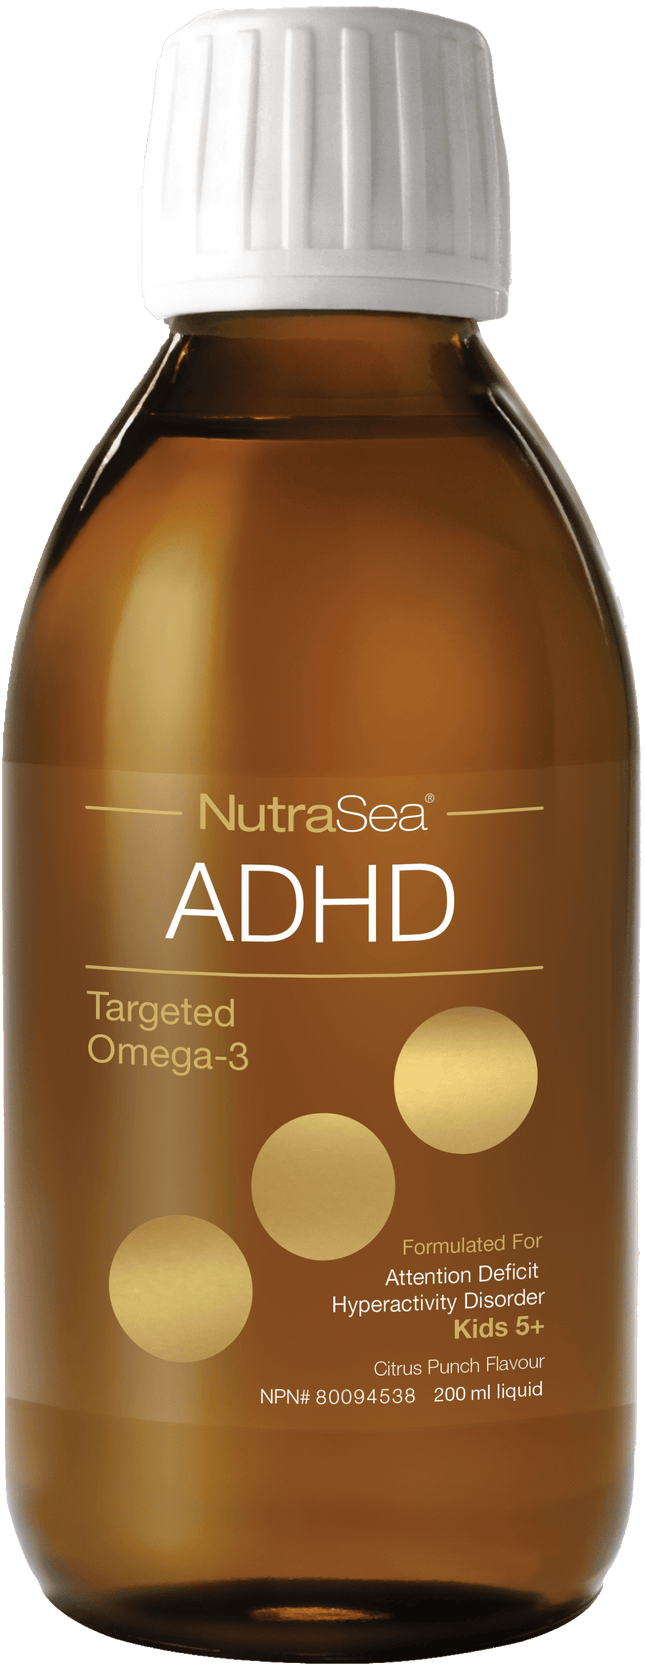 NUTRASEA ADHD TARGETED OMEGA-3 CITRUS PUNCH 200ml